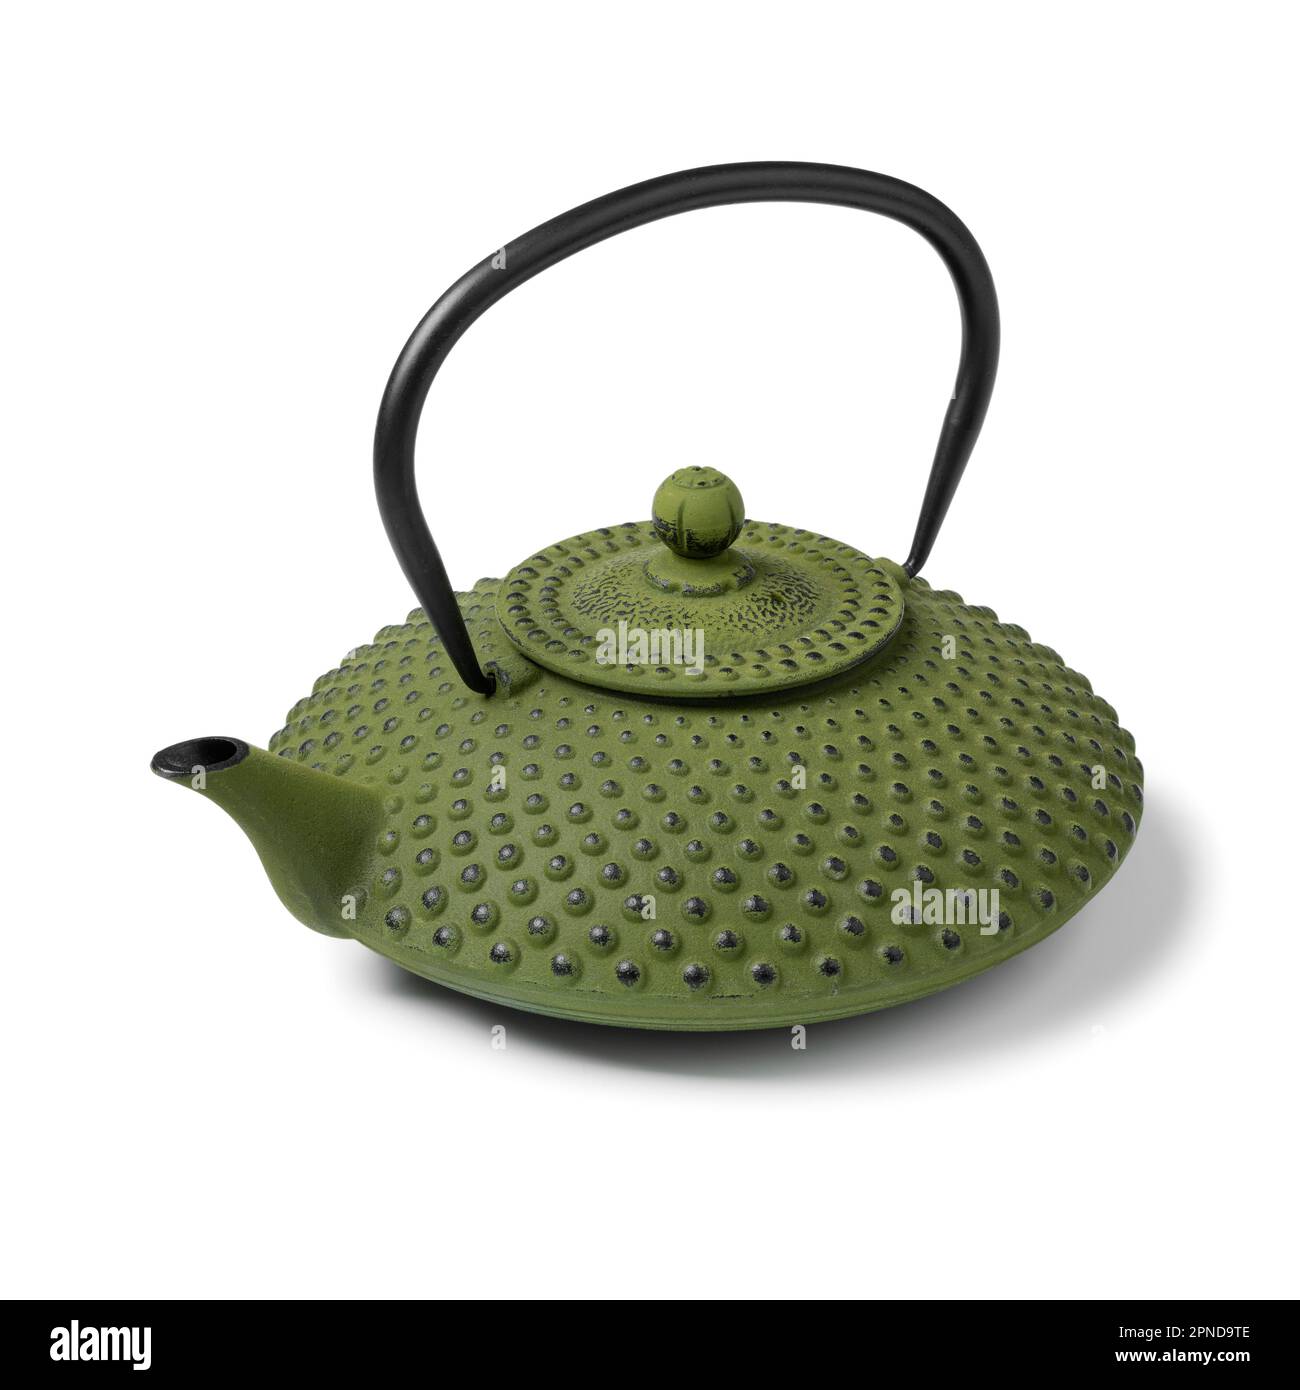 Authentic Japanese green Cast Iron Kettle and Teapot isolated on white background close up Stock Photo